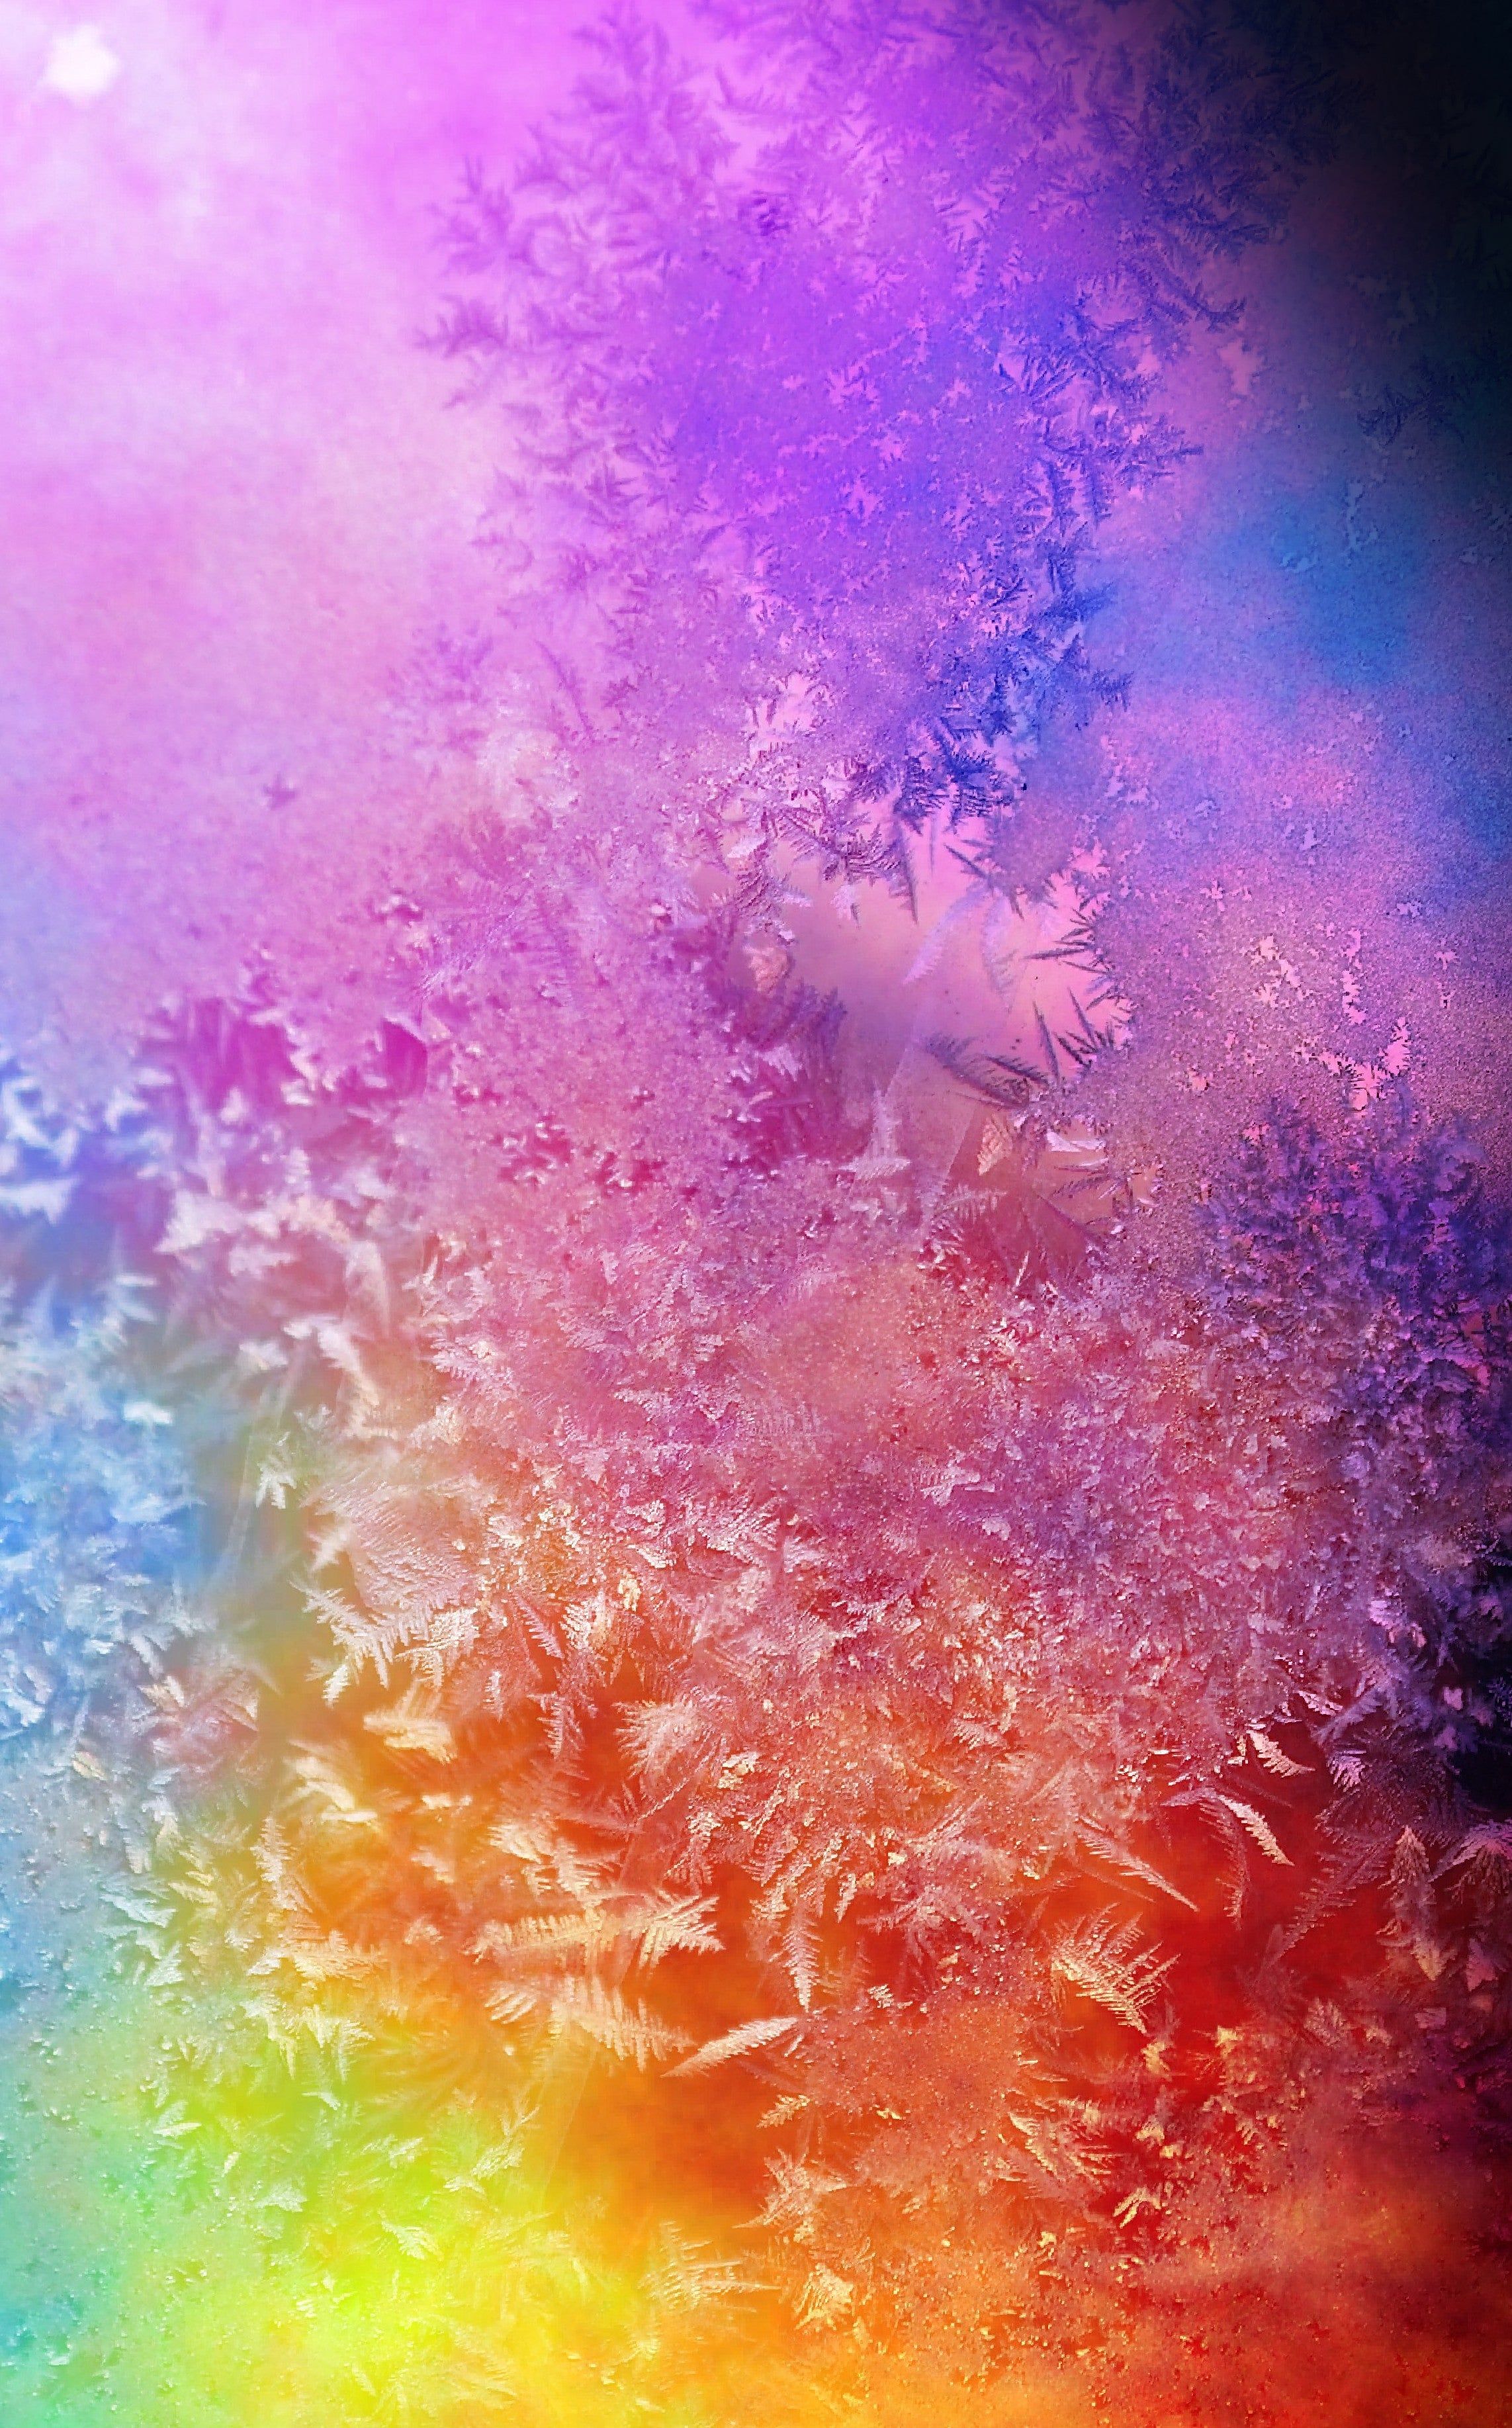 Ice Crystals s10 wallpaper